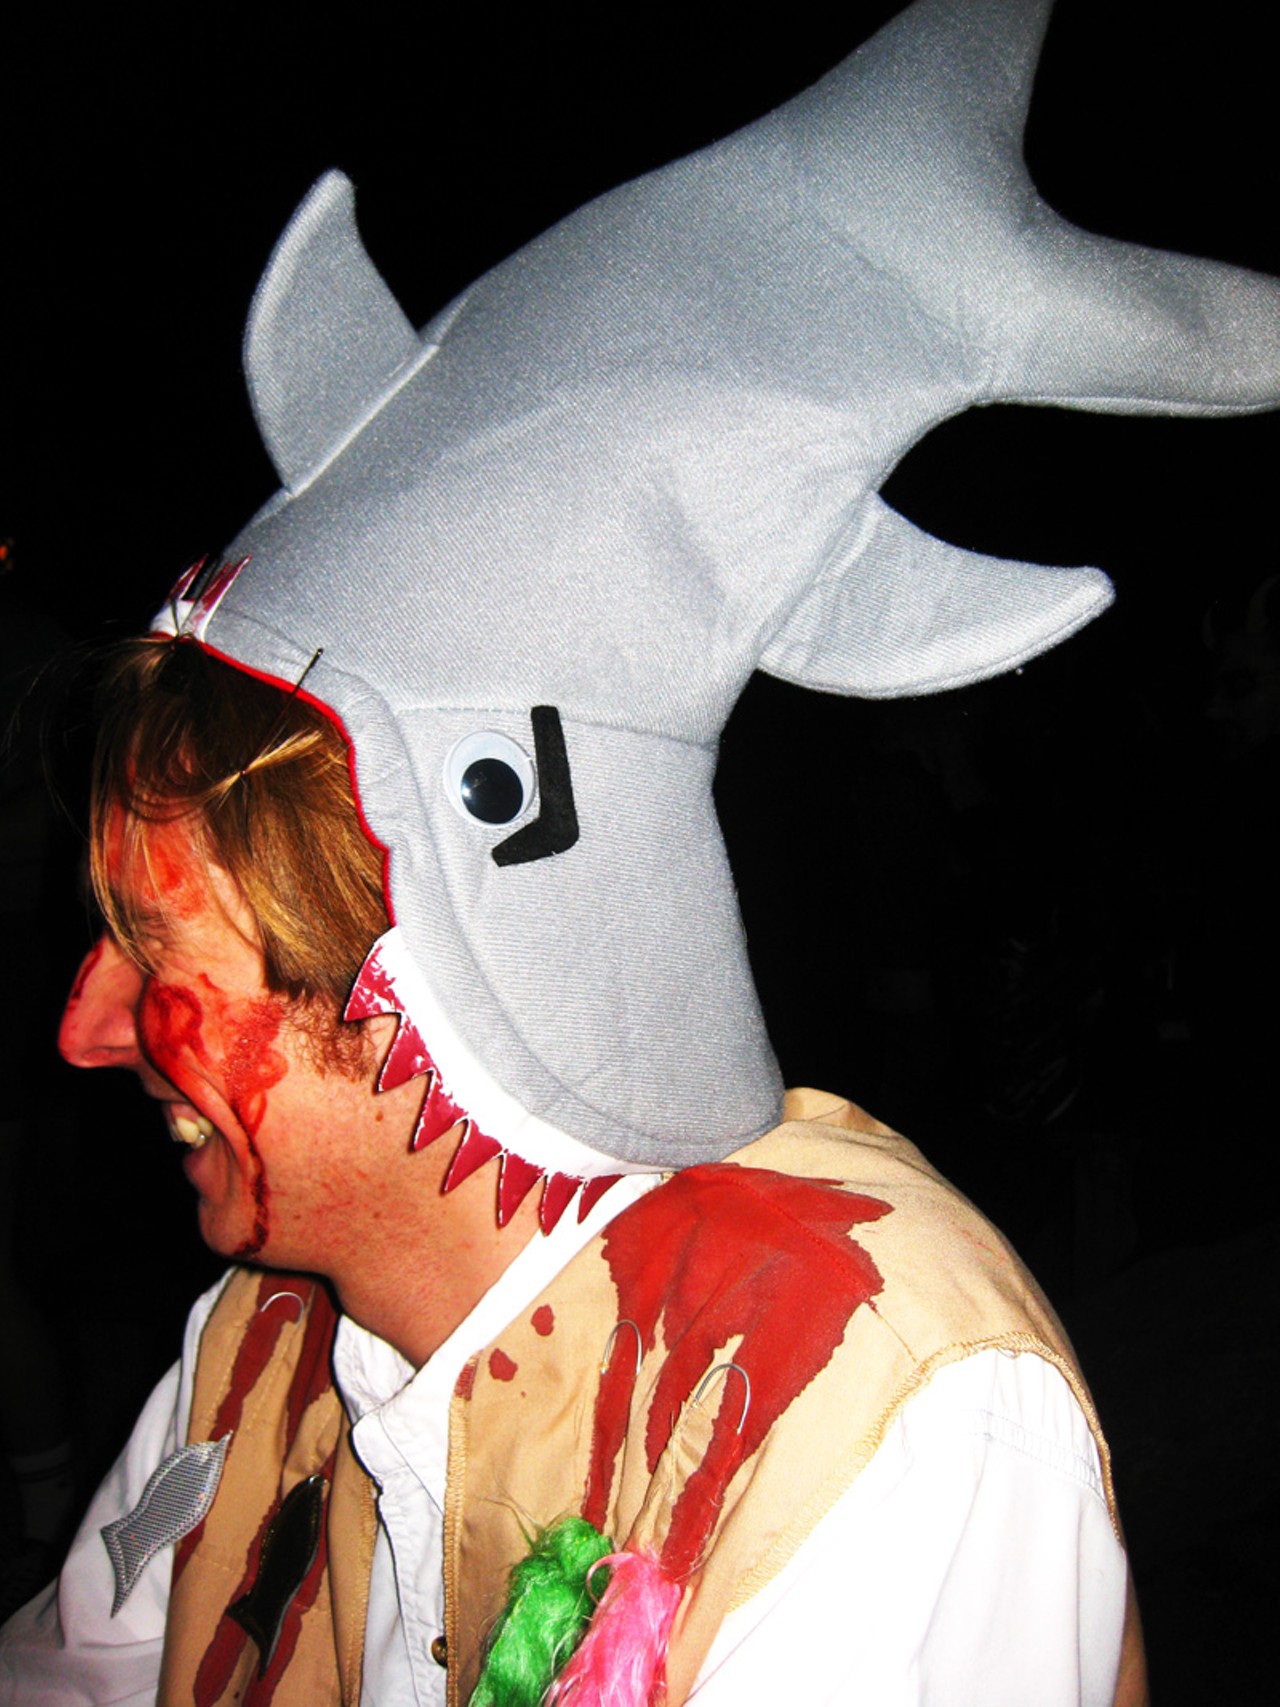 Shark attack in San Francisco's Mission District.